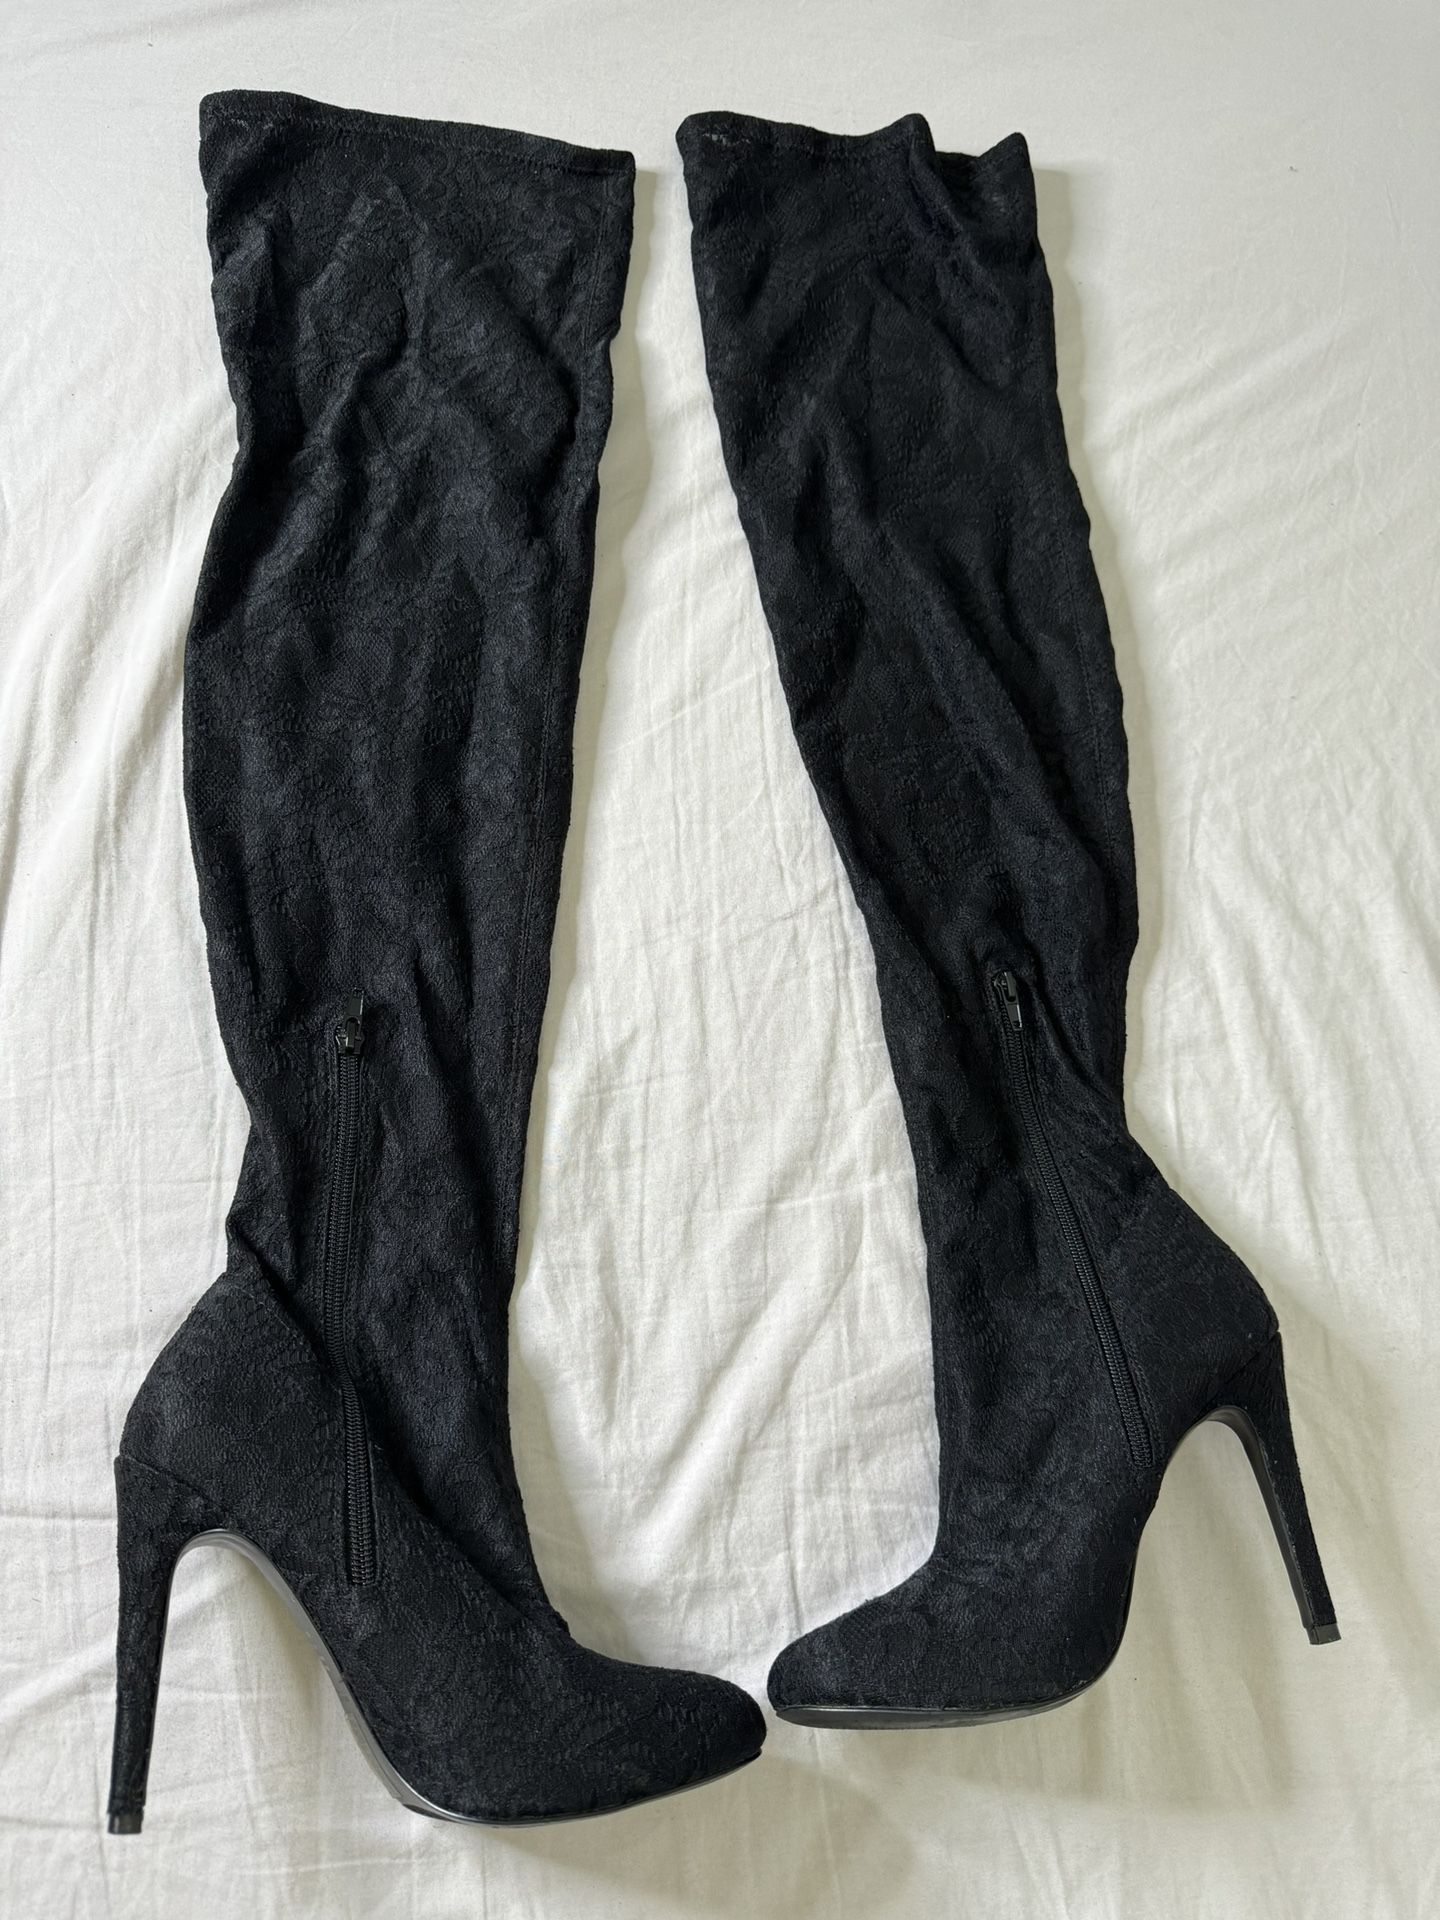 Women’s Black Laced Knee High Boots 